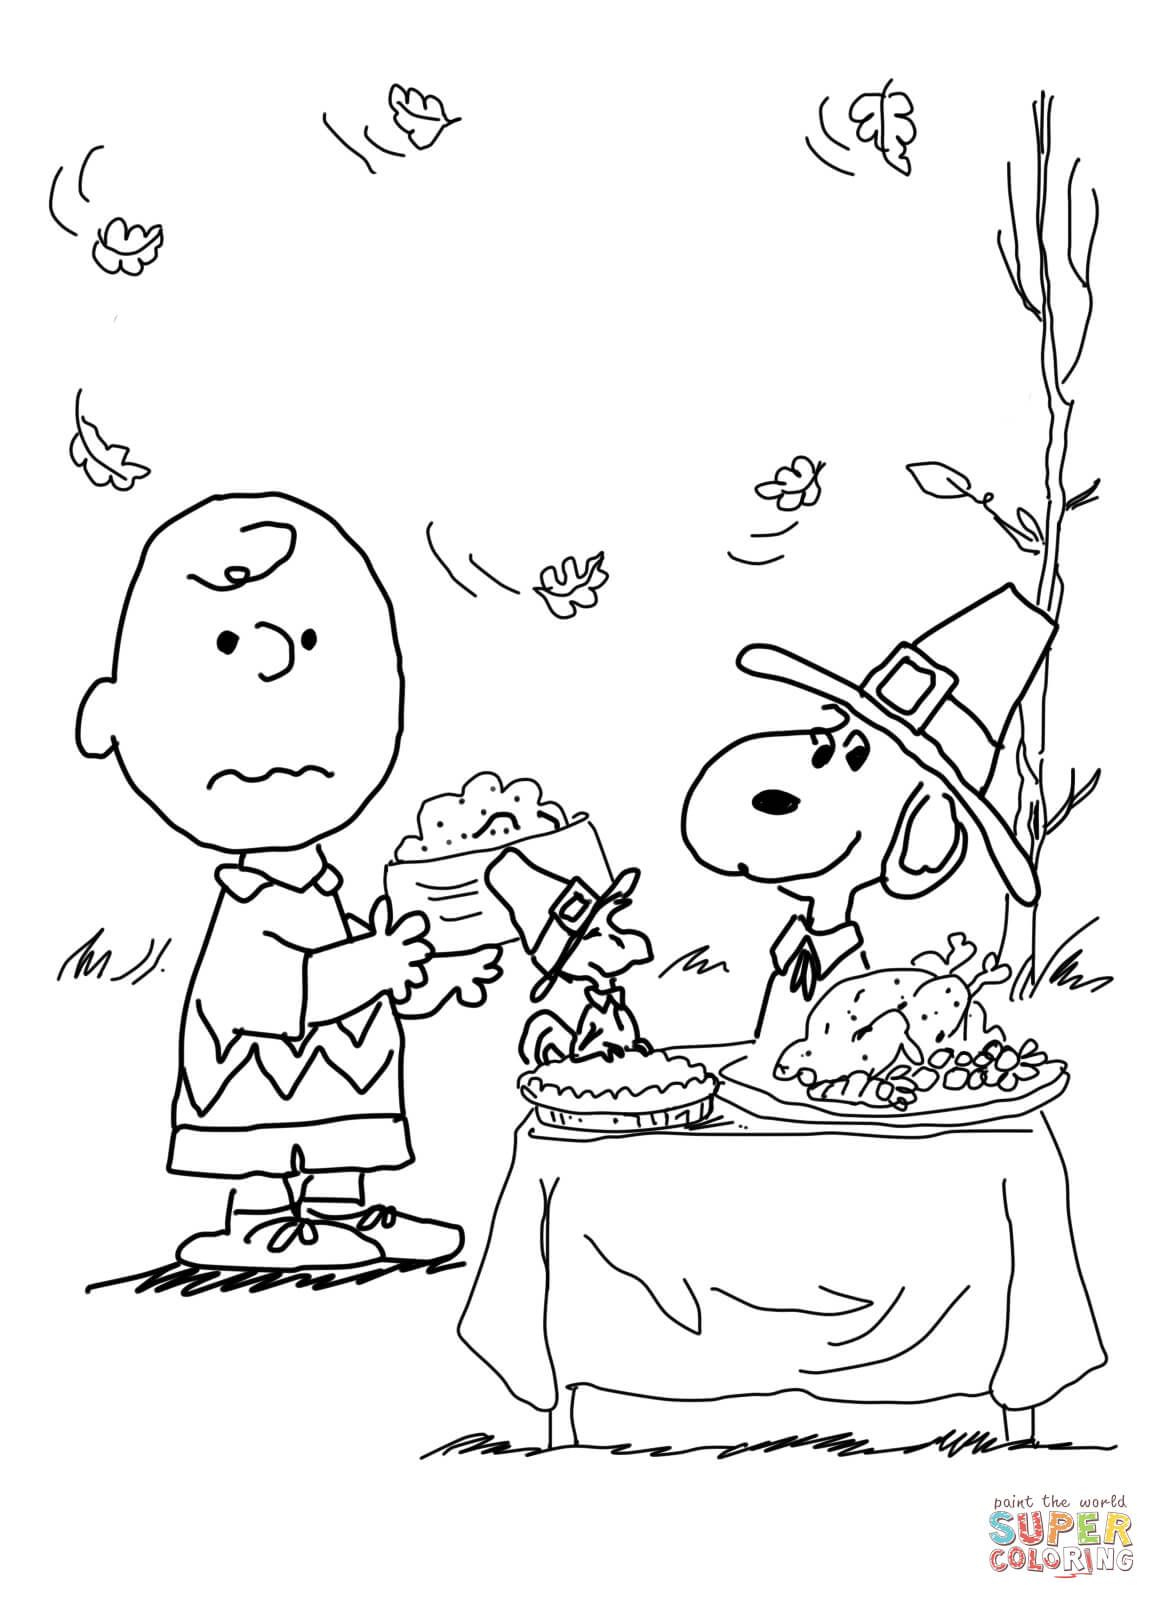 Charlie Brown Thanksgiving Coloring Page From Peanuts Category - Free Printable Charlie Brown Halloween Coloring Pages